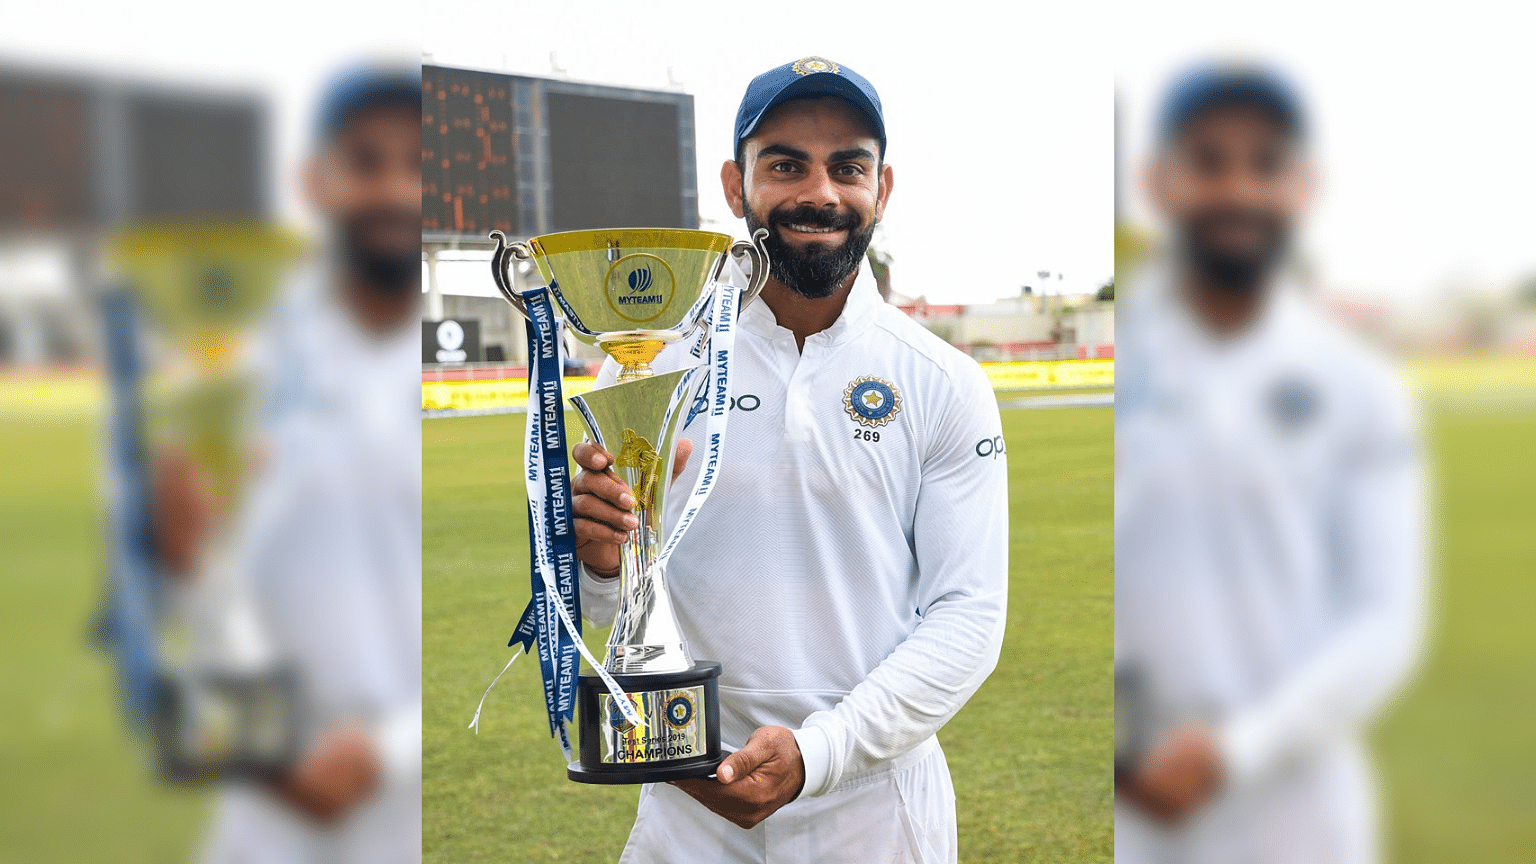 Virat Kohli became India’s most successful Test captain as India beat West Indies by 257 runs on Monday.